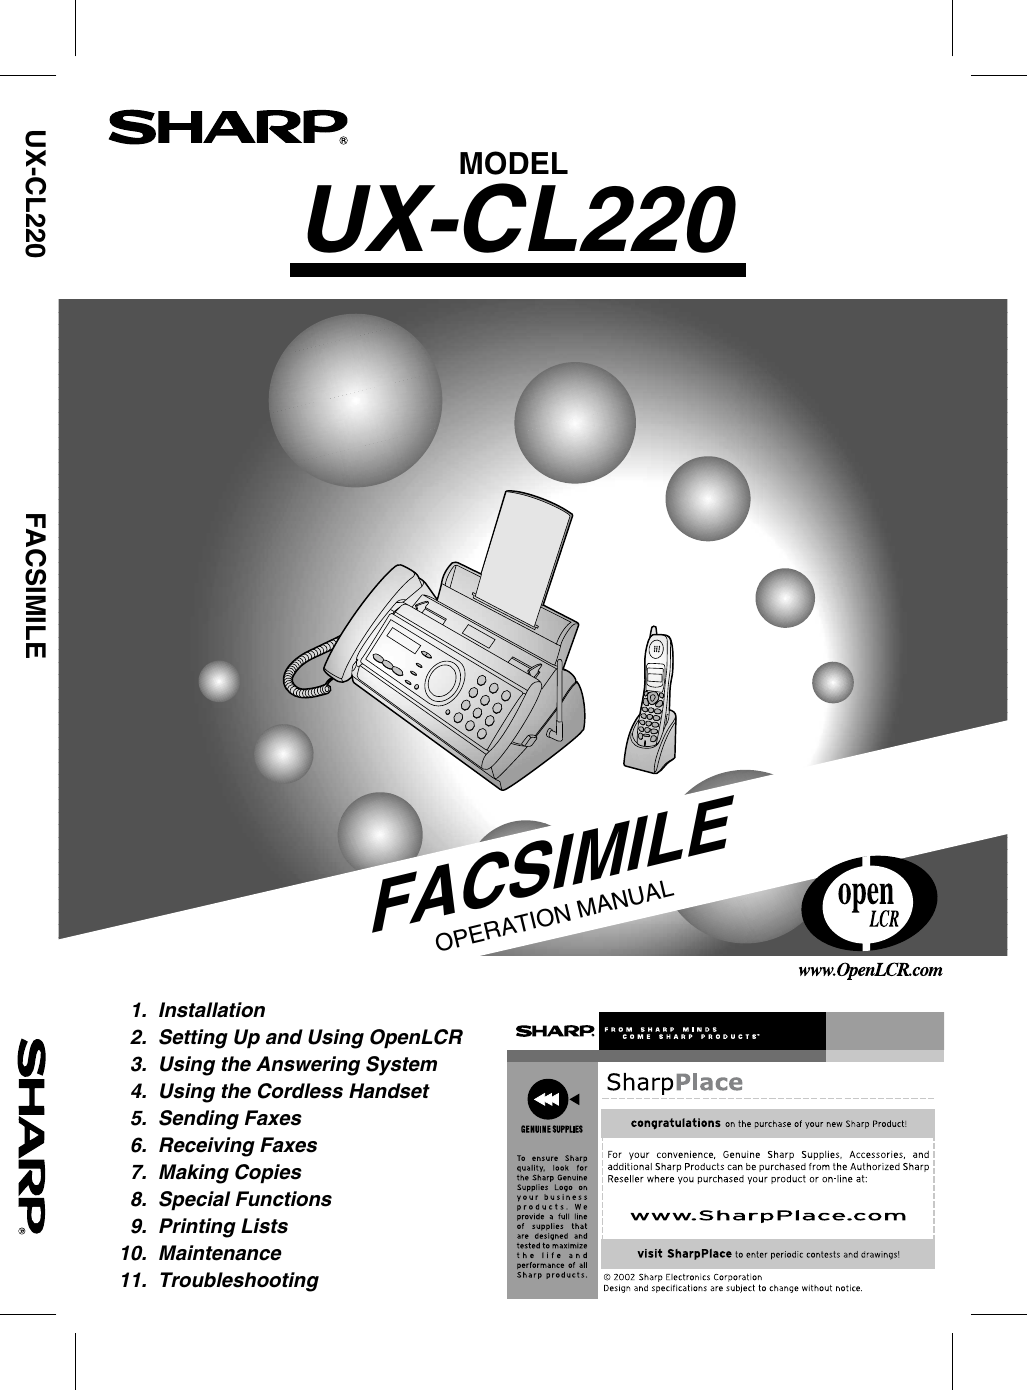 MODELUX-CL220FACSIMILEOPERATION MANUAL  1.  Installation     2.  Setting Up and Using OpenLCR  3.  Using the Answering System  4.  Using the Cordless Handset  5.  Sending Faxes  6.  Receiving Faxes  7.  Making Copies  8.  Special Functions  9.  Printing Lists10.  Maintenance11.  TroubleshootingUX-CL220     FACSIMILE 